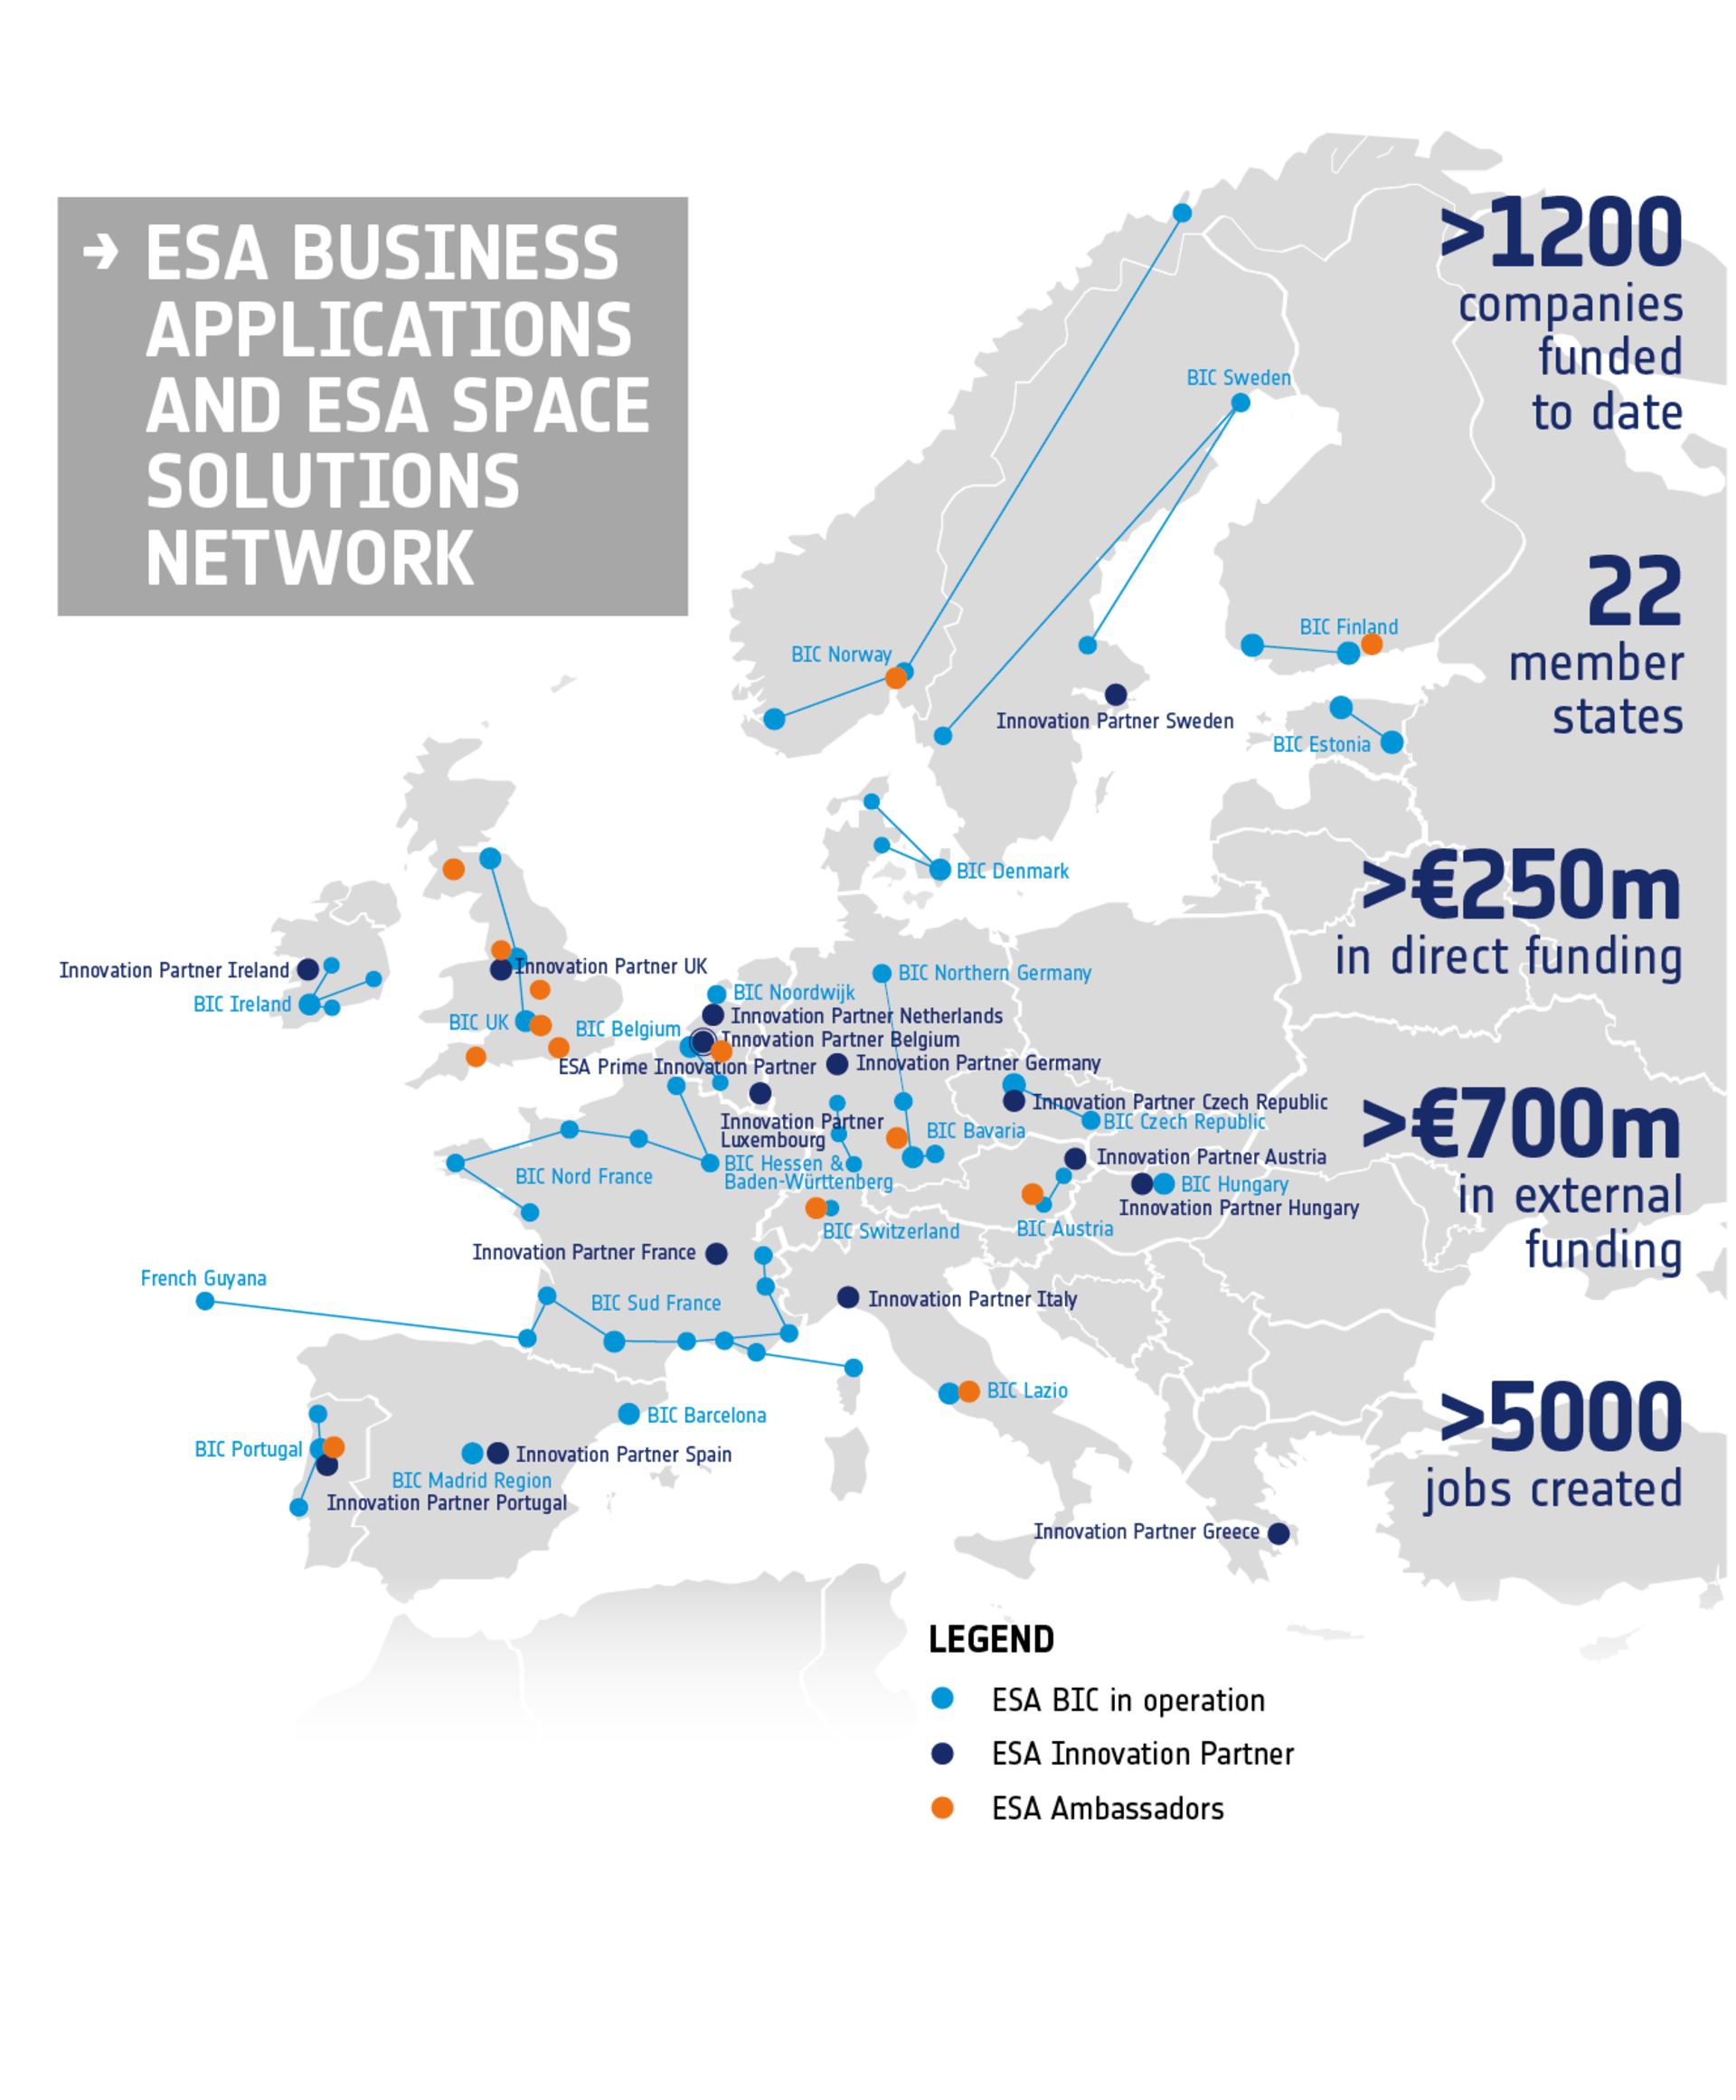 ESA Business Applications and Space Solutions 